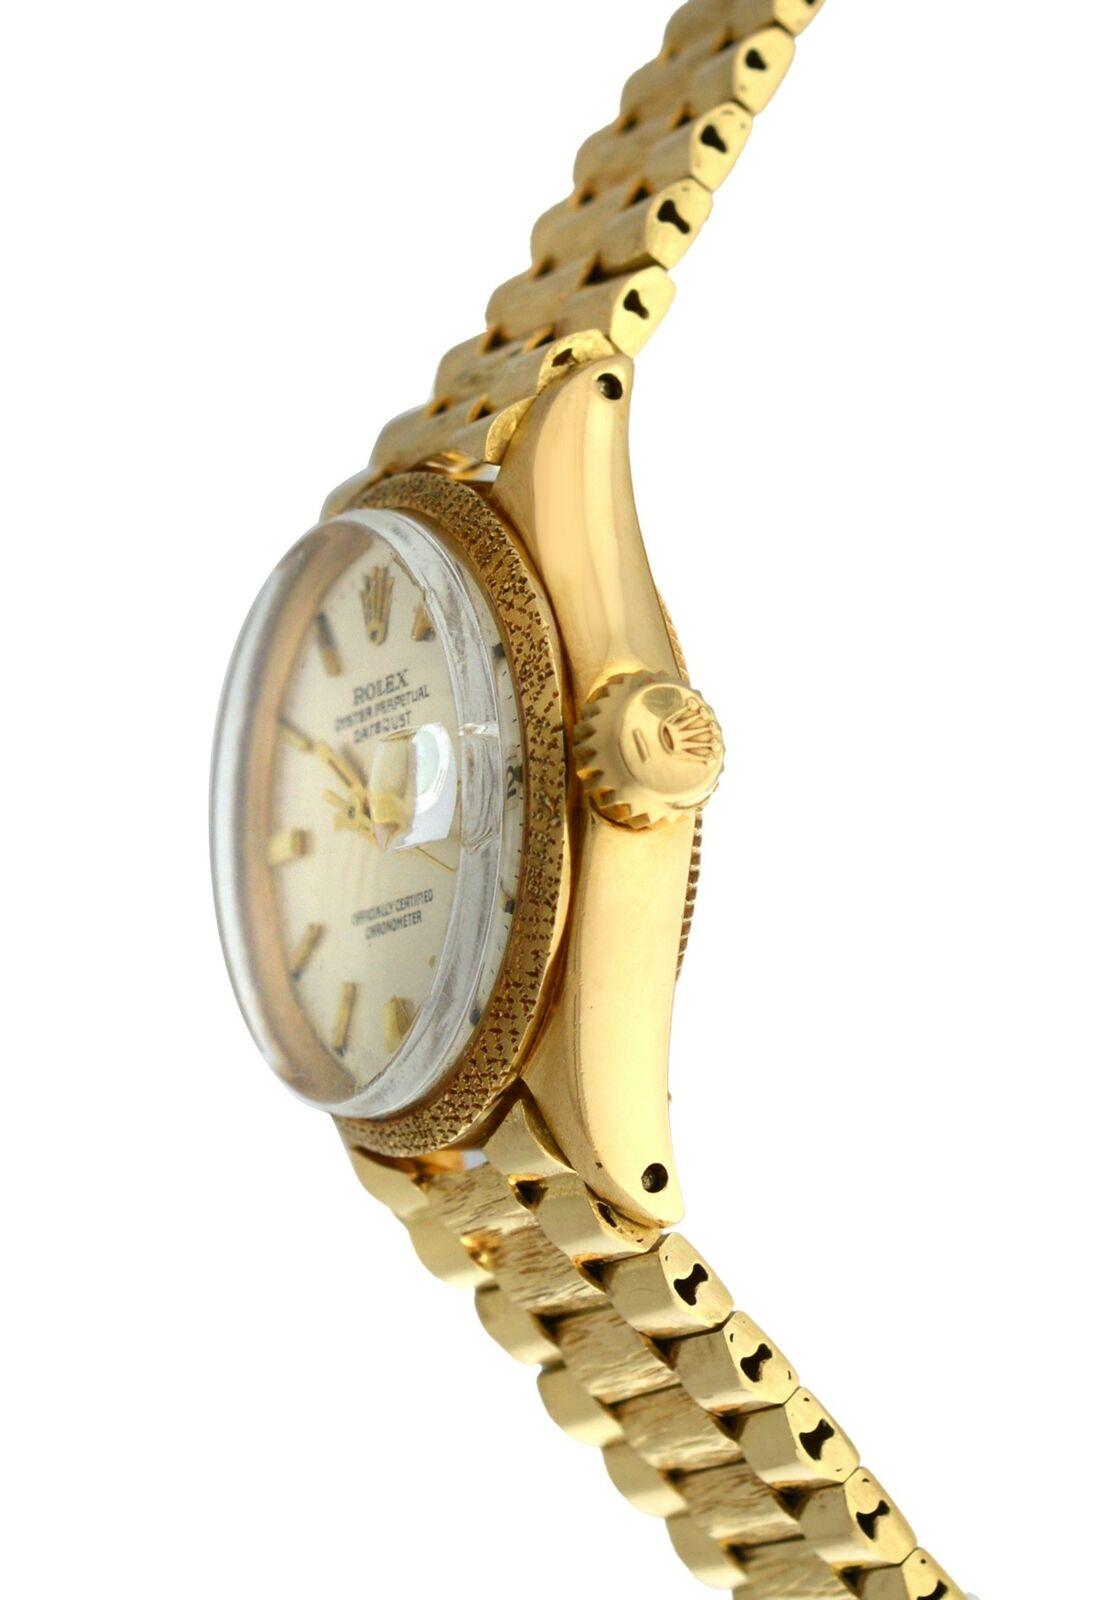 
Brand	Rolex
Model	Oyster Perpetual Date Just 6701
Gender	Ladies
Condition	Pre-owned
Movement	Swiss automatic
Case Material	18K Yellow Gold
Bracelet / Strap Material	
18K Yellow Gold

Clasp / Buckle Material	
18K Yellow Gold	
Clasp